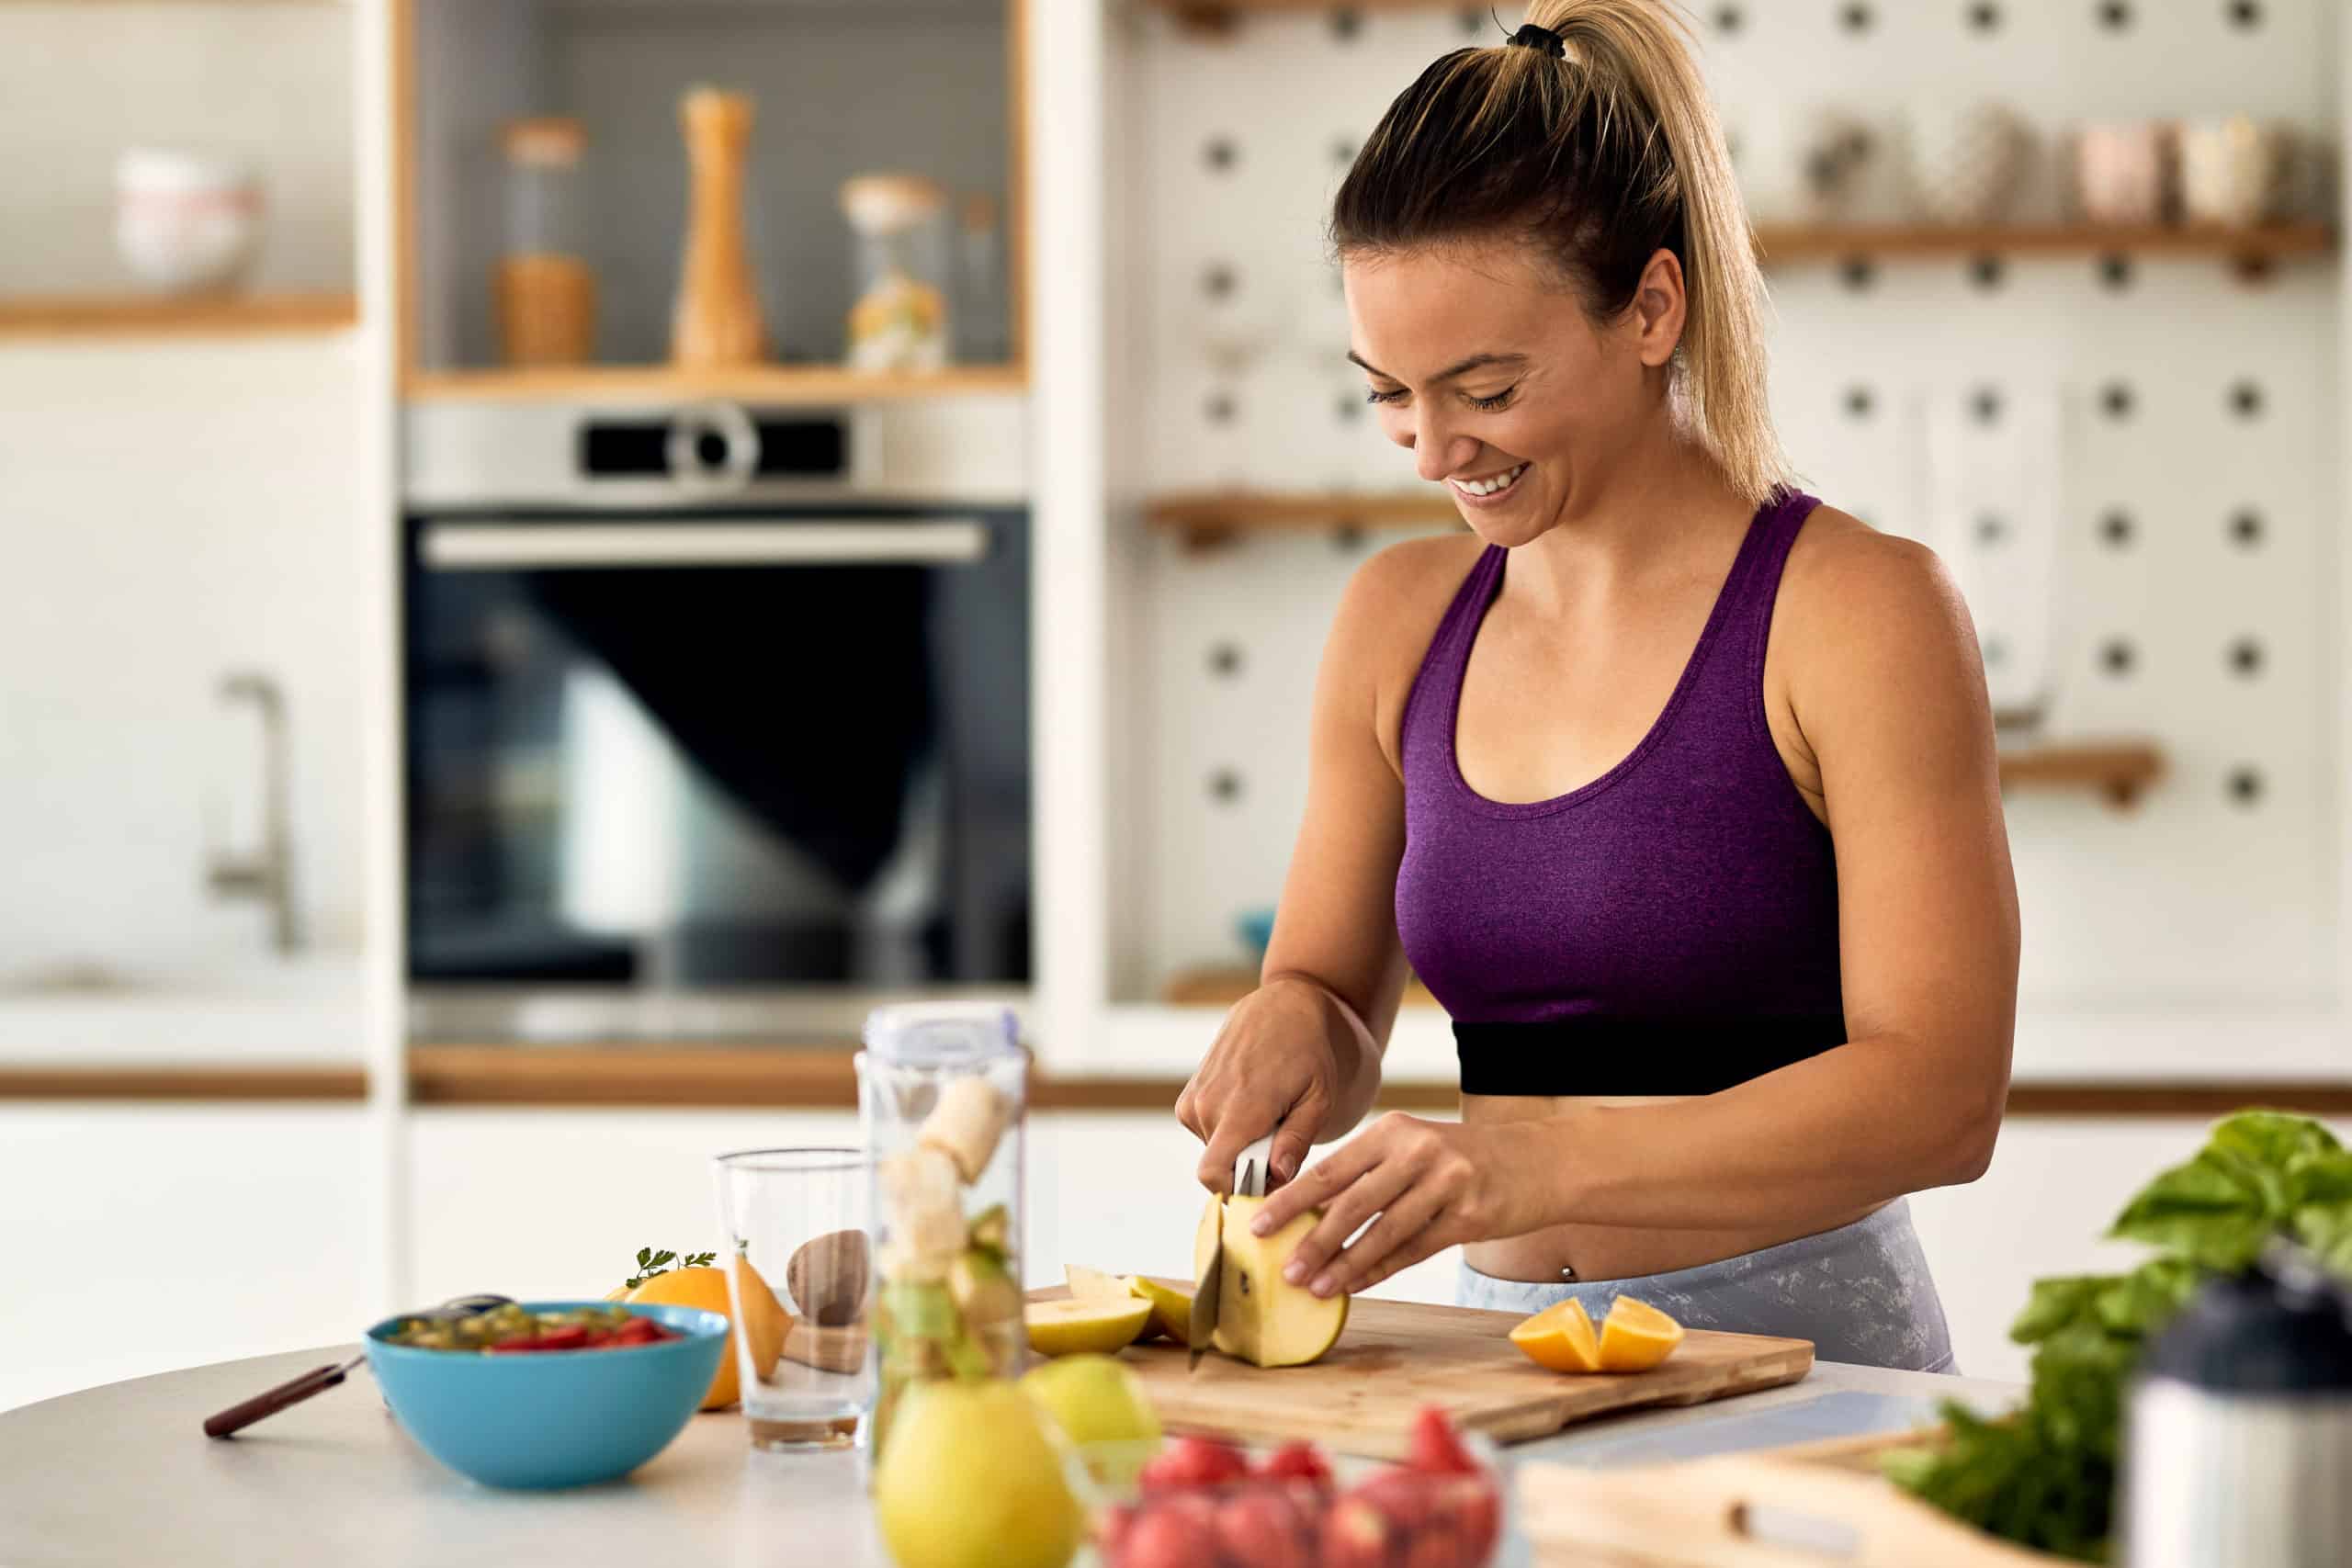 happy-athletic-woman-cutting-fruit-while-preparing-healthy-meal-kitchen-scaled